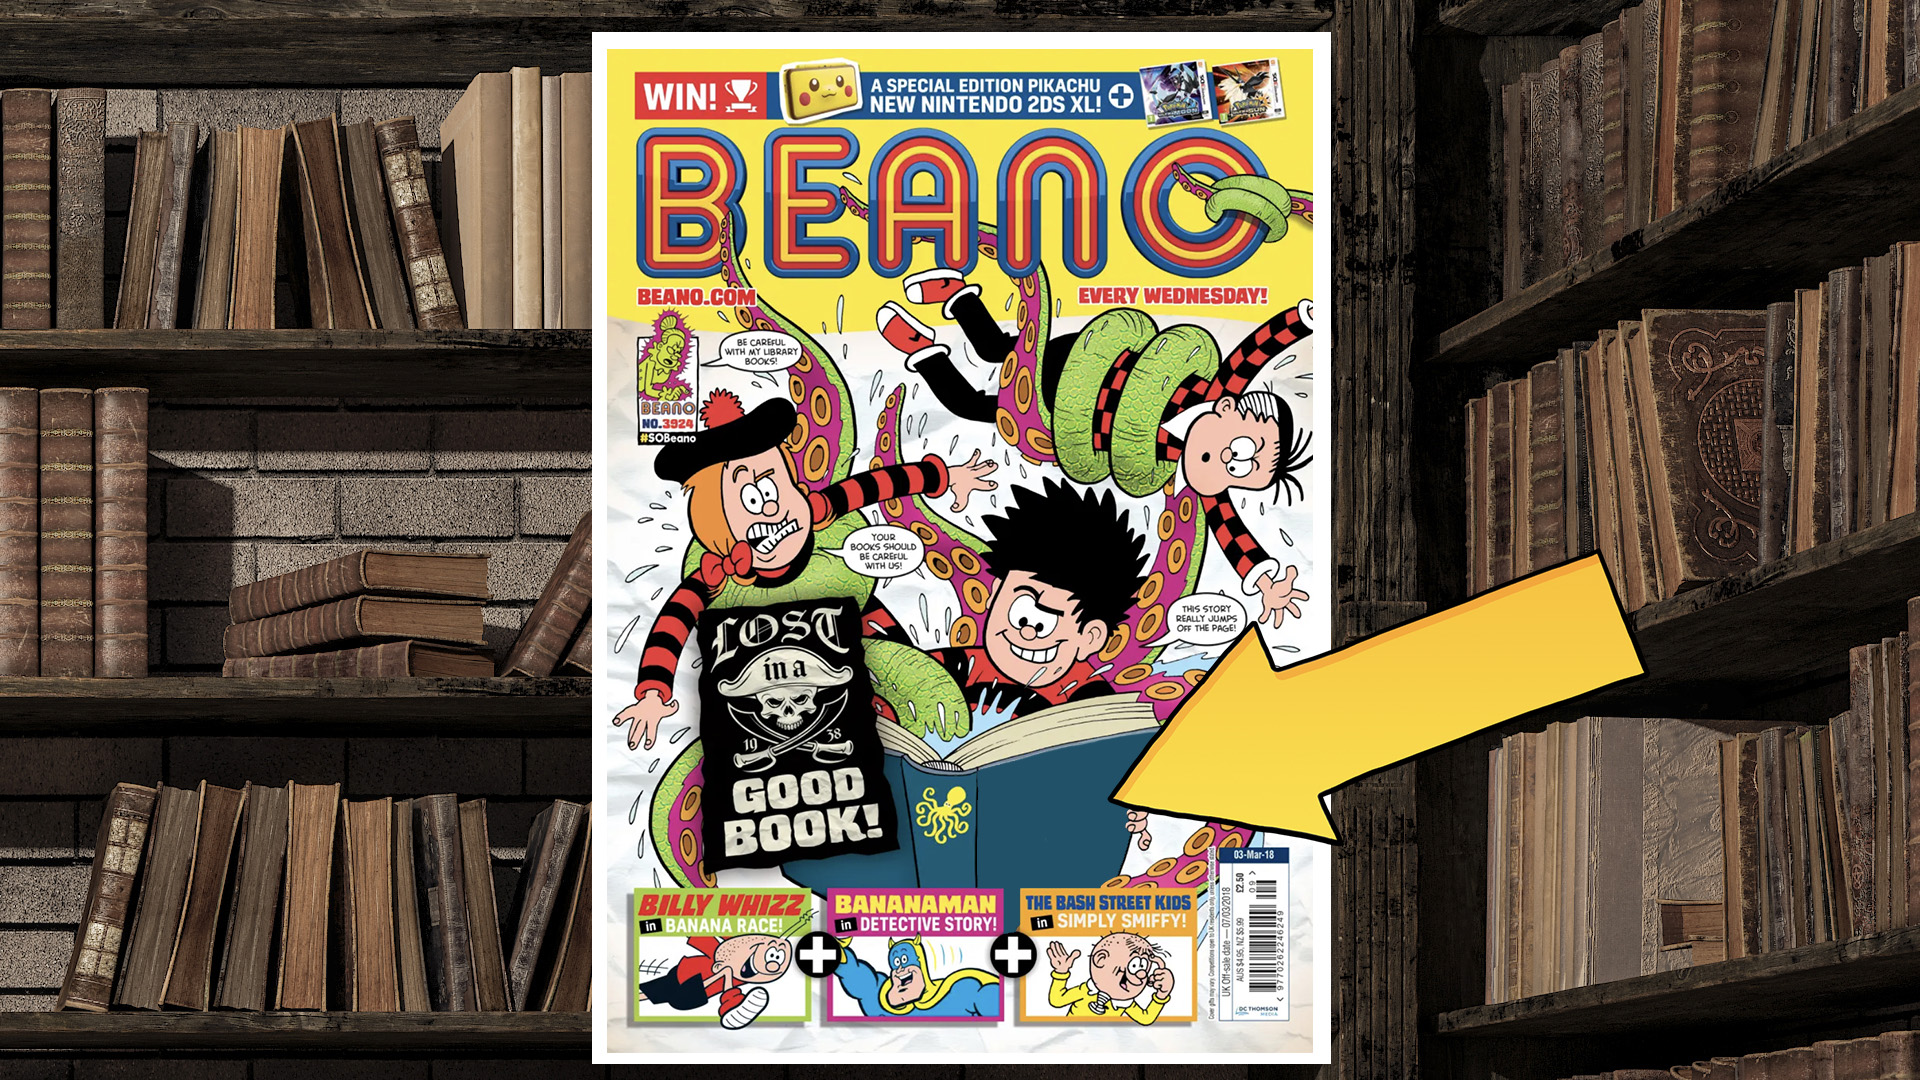 A library-themed cover of the Beano